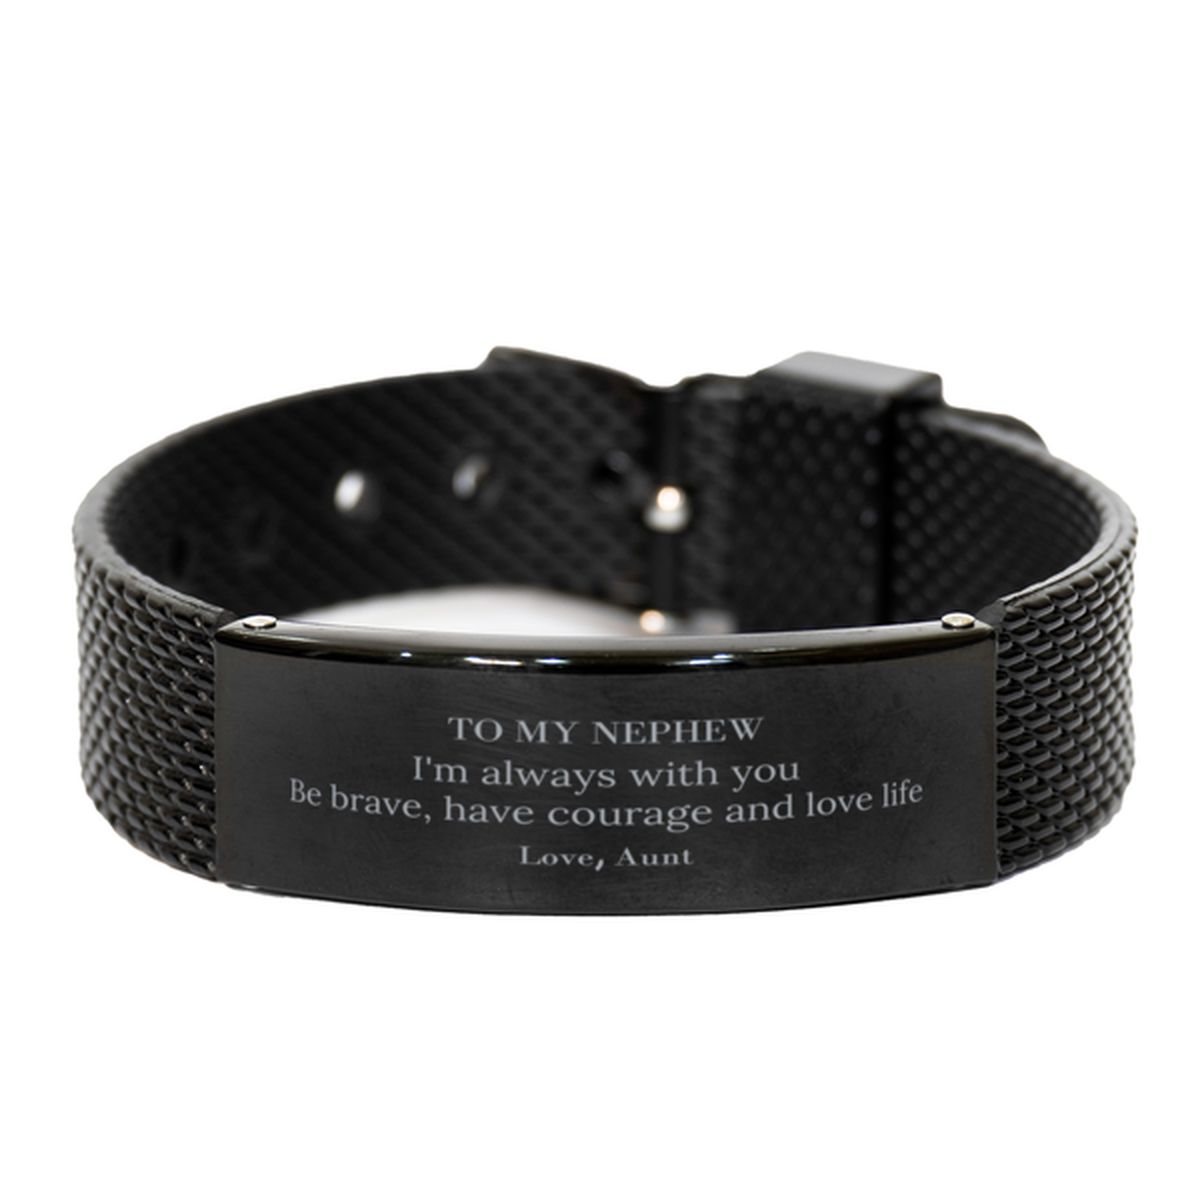 To My Nephew Gifts from Aunt, Unique Black Shark Mesh Bracelet Inspirational Christmas Birthday Graduation Gifts for Nephew I'm always with you. Be brave, have courage and love life. Love, Aunt